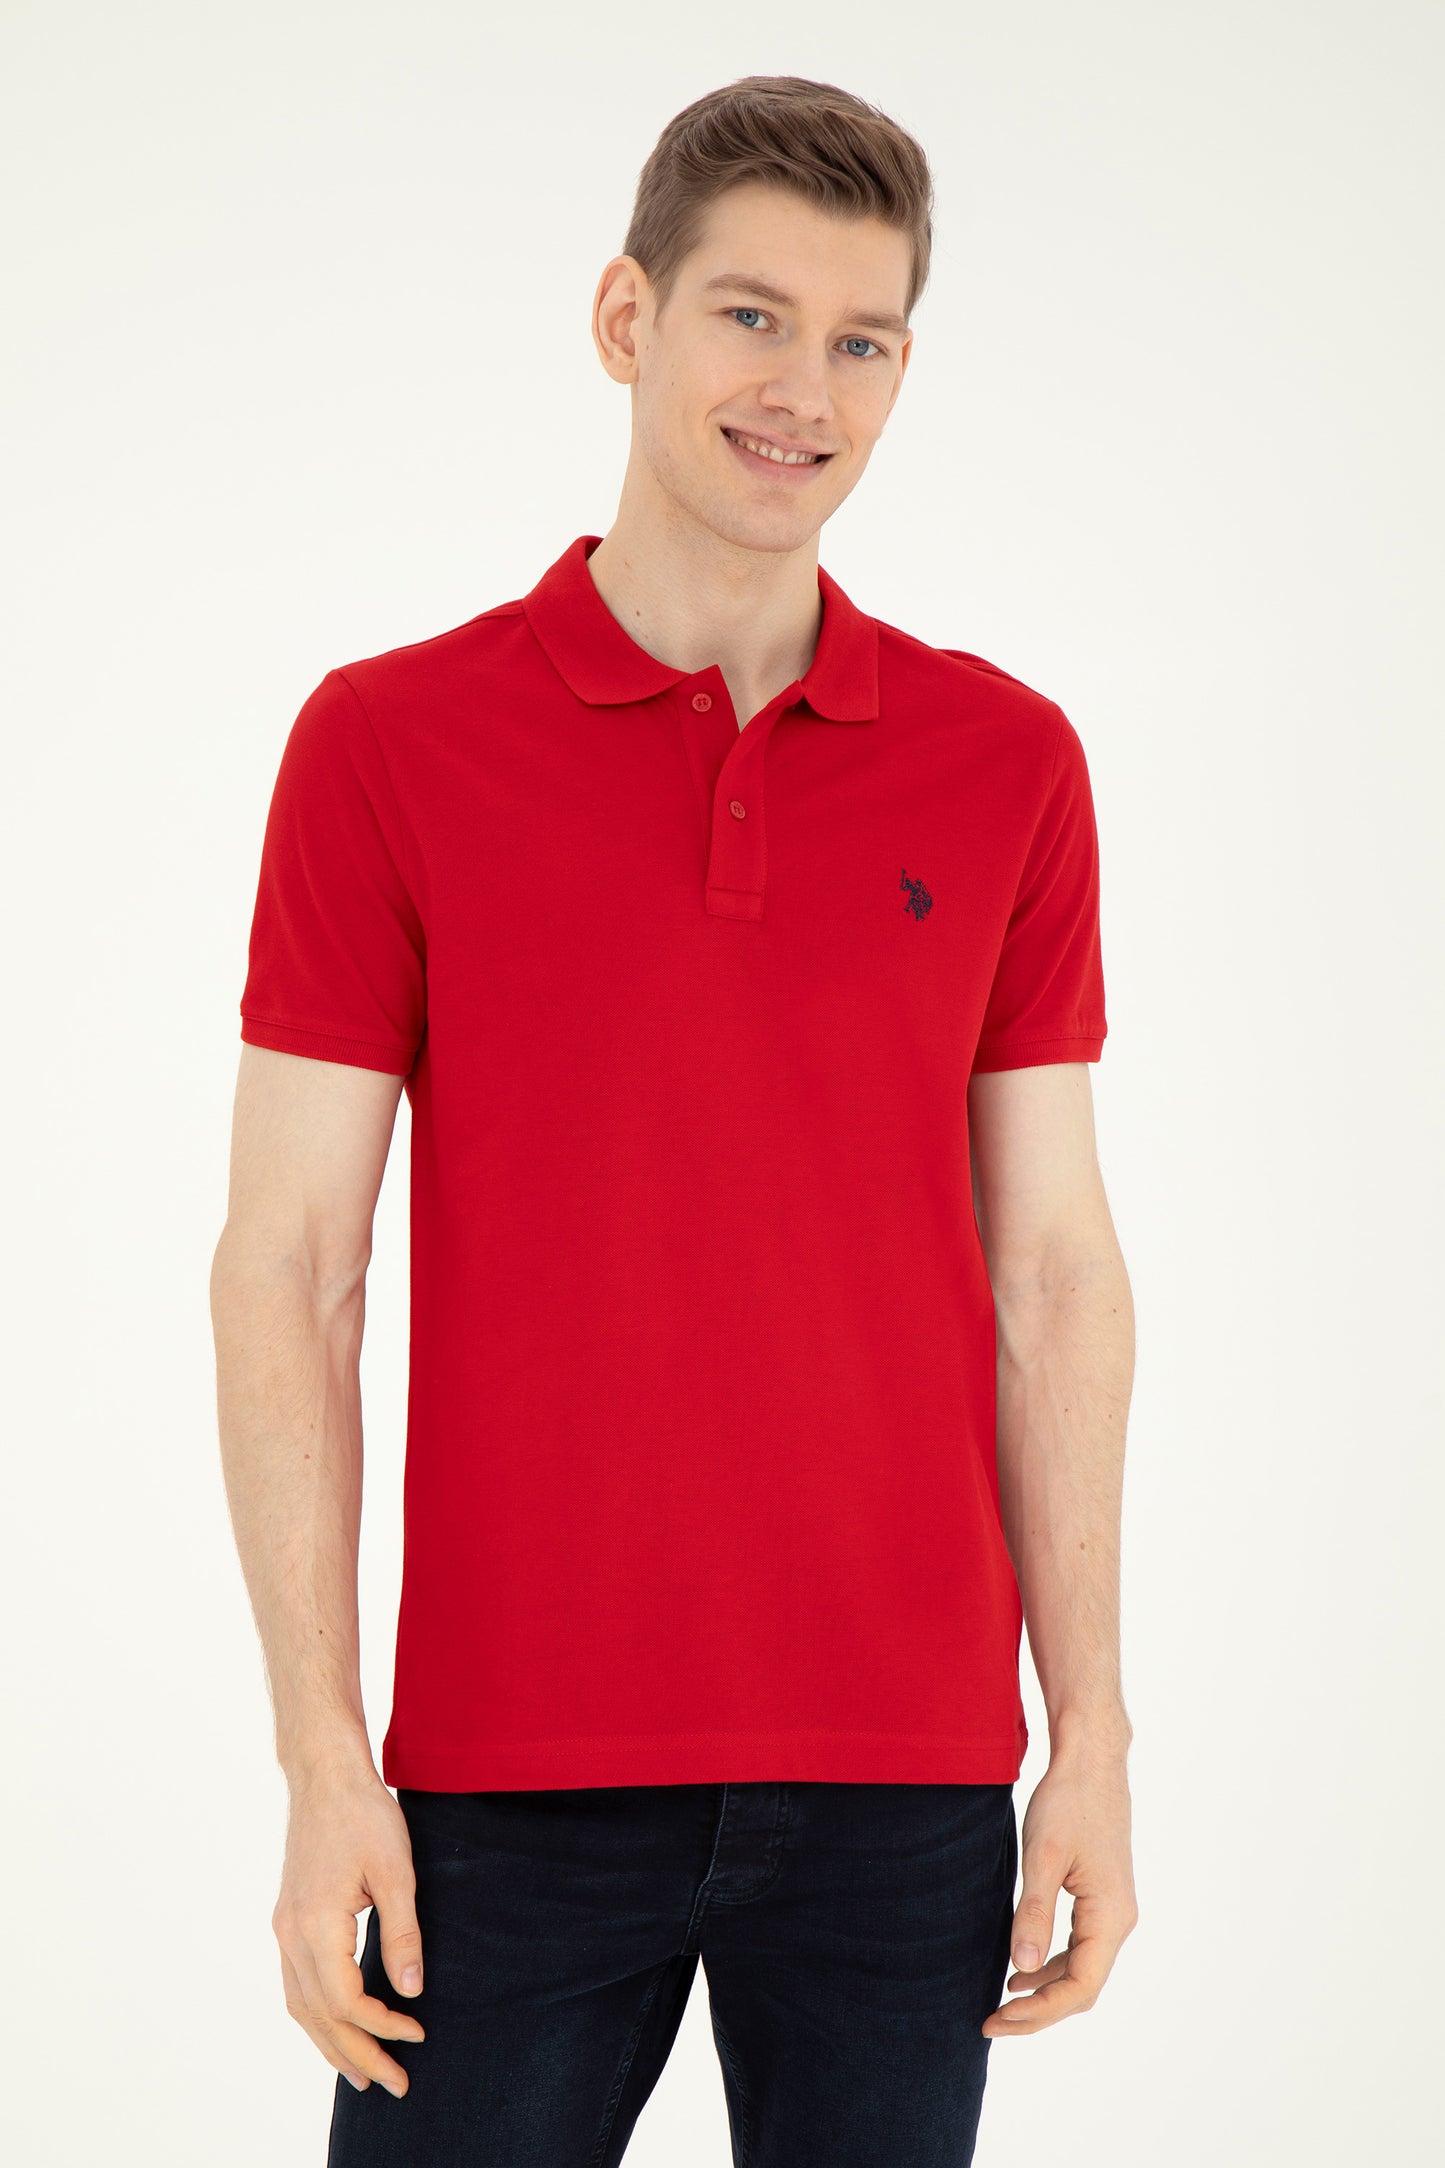 T SHIRT Homme GTP04 RED LIGHT 1792406VR171